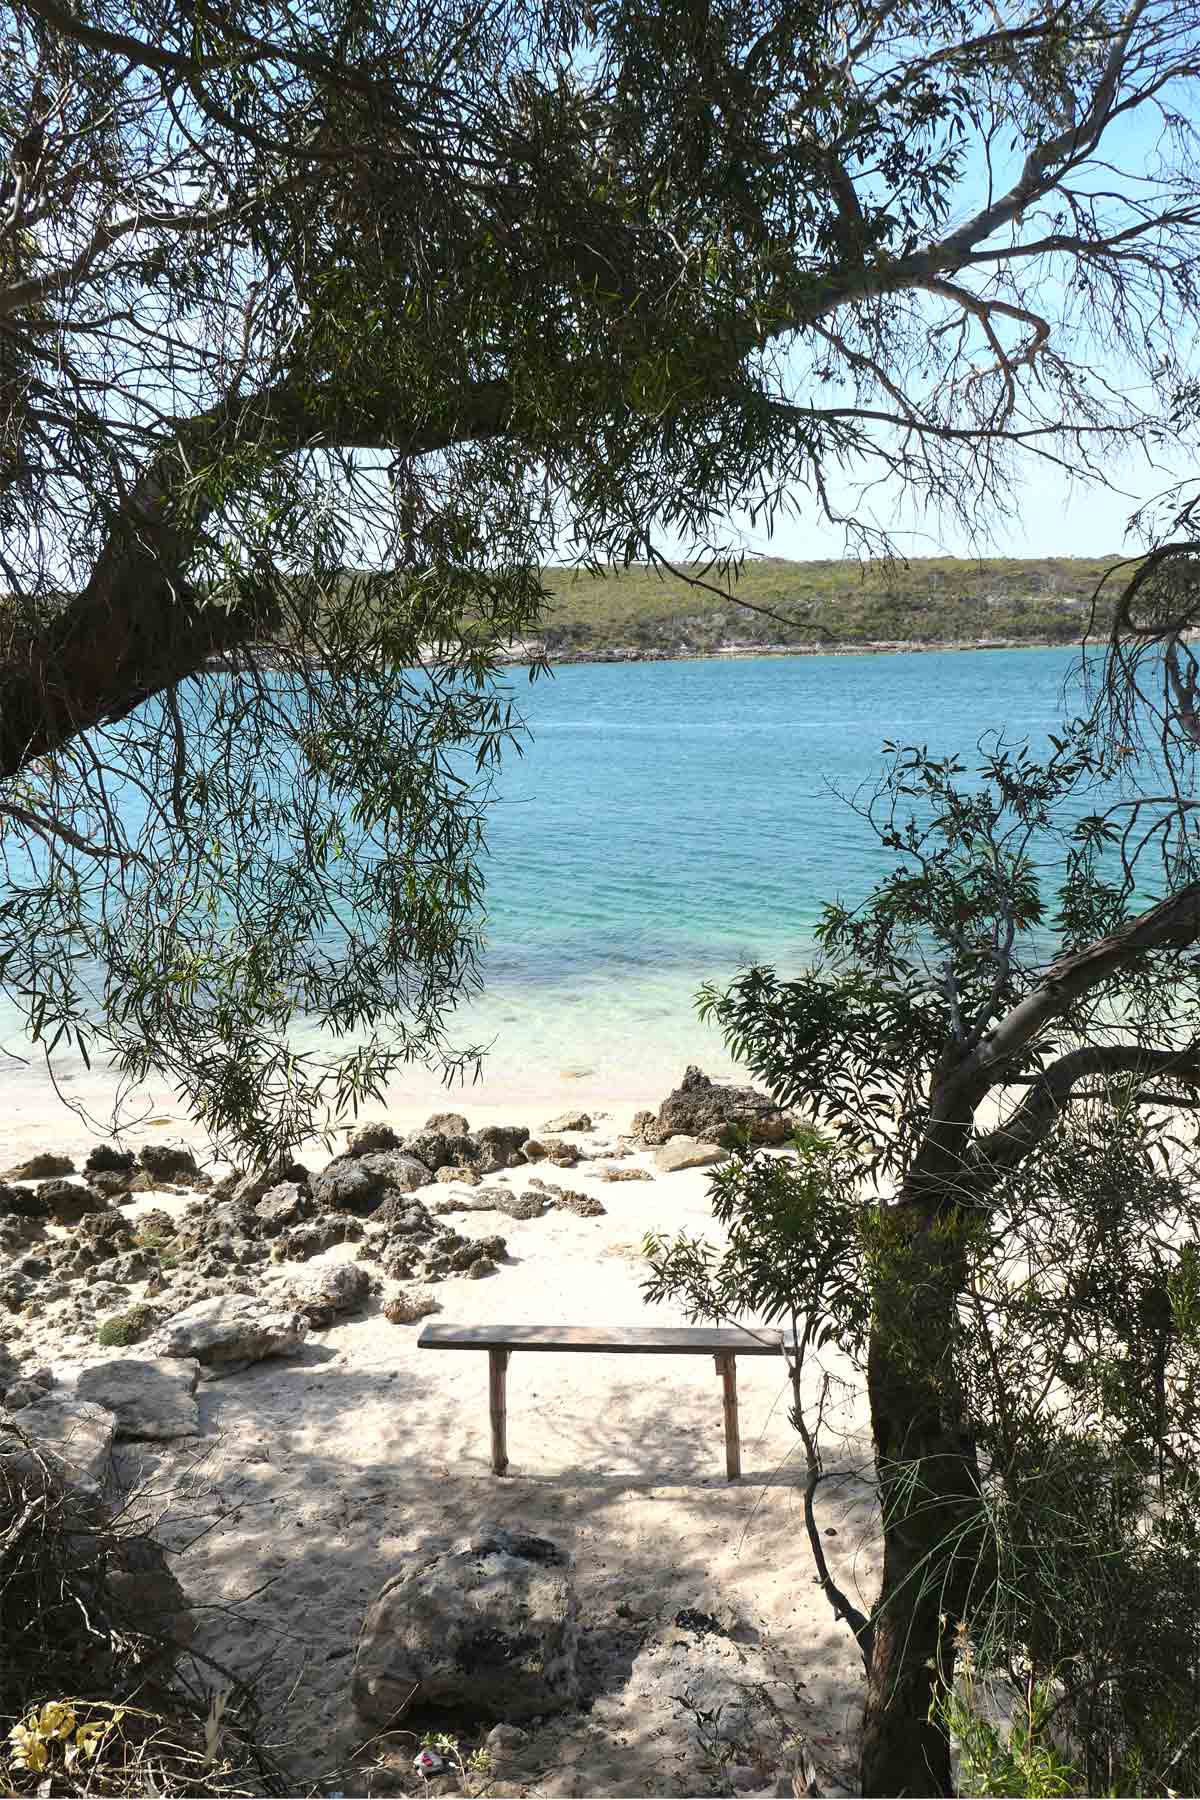 Secluded beach. Located in Coffin Bay, Eyre Peninsula, South Australia.